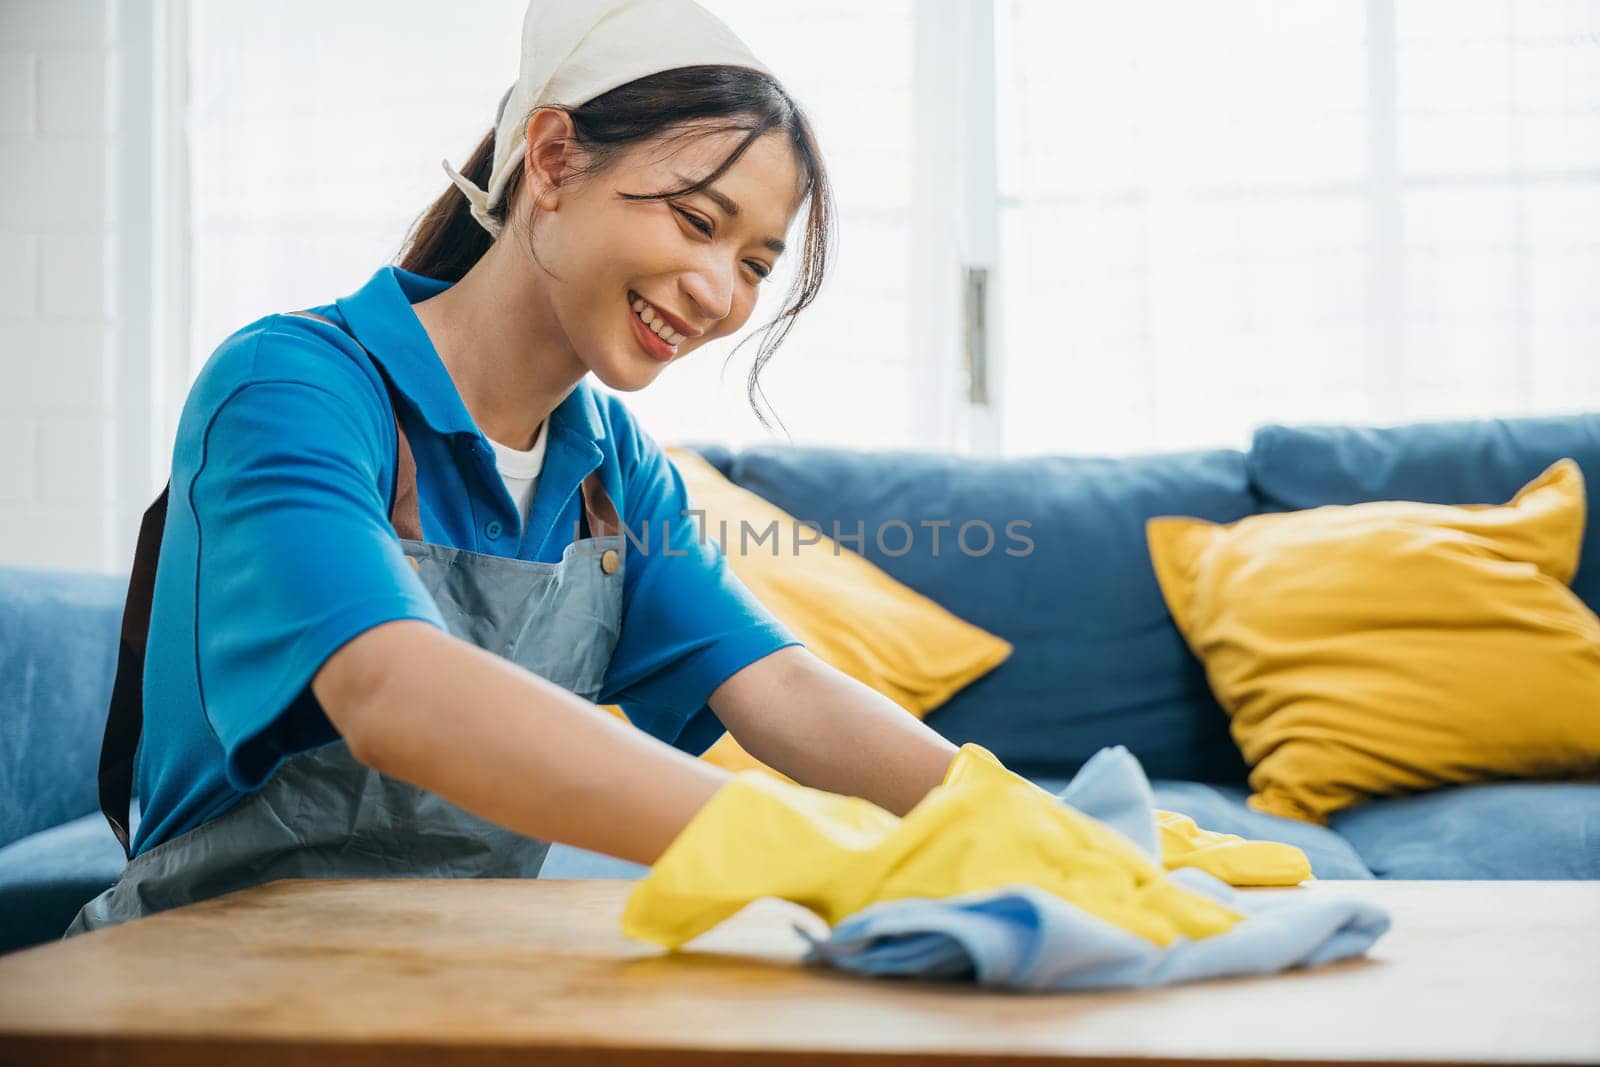 Smiling housewife in yellow gloves wipes table with care. Her routine involves cleaning home surfaces with a cloth. She's a diligent woman maintaining cleanliness and hygiene indoors. maid clean desk.